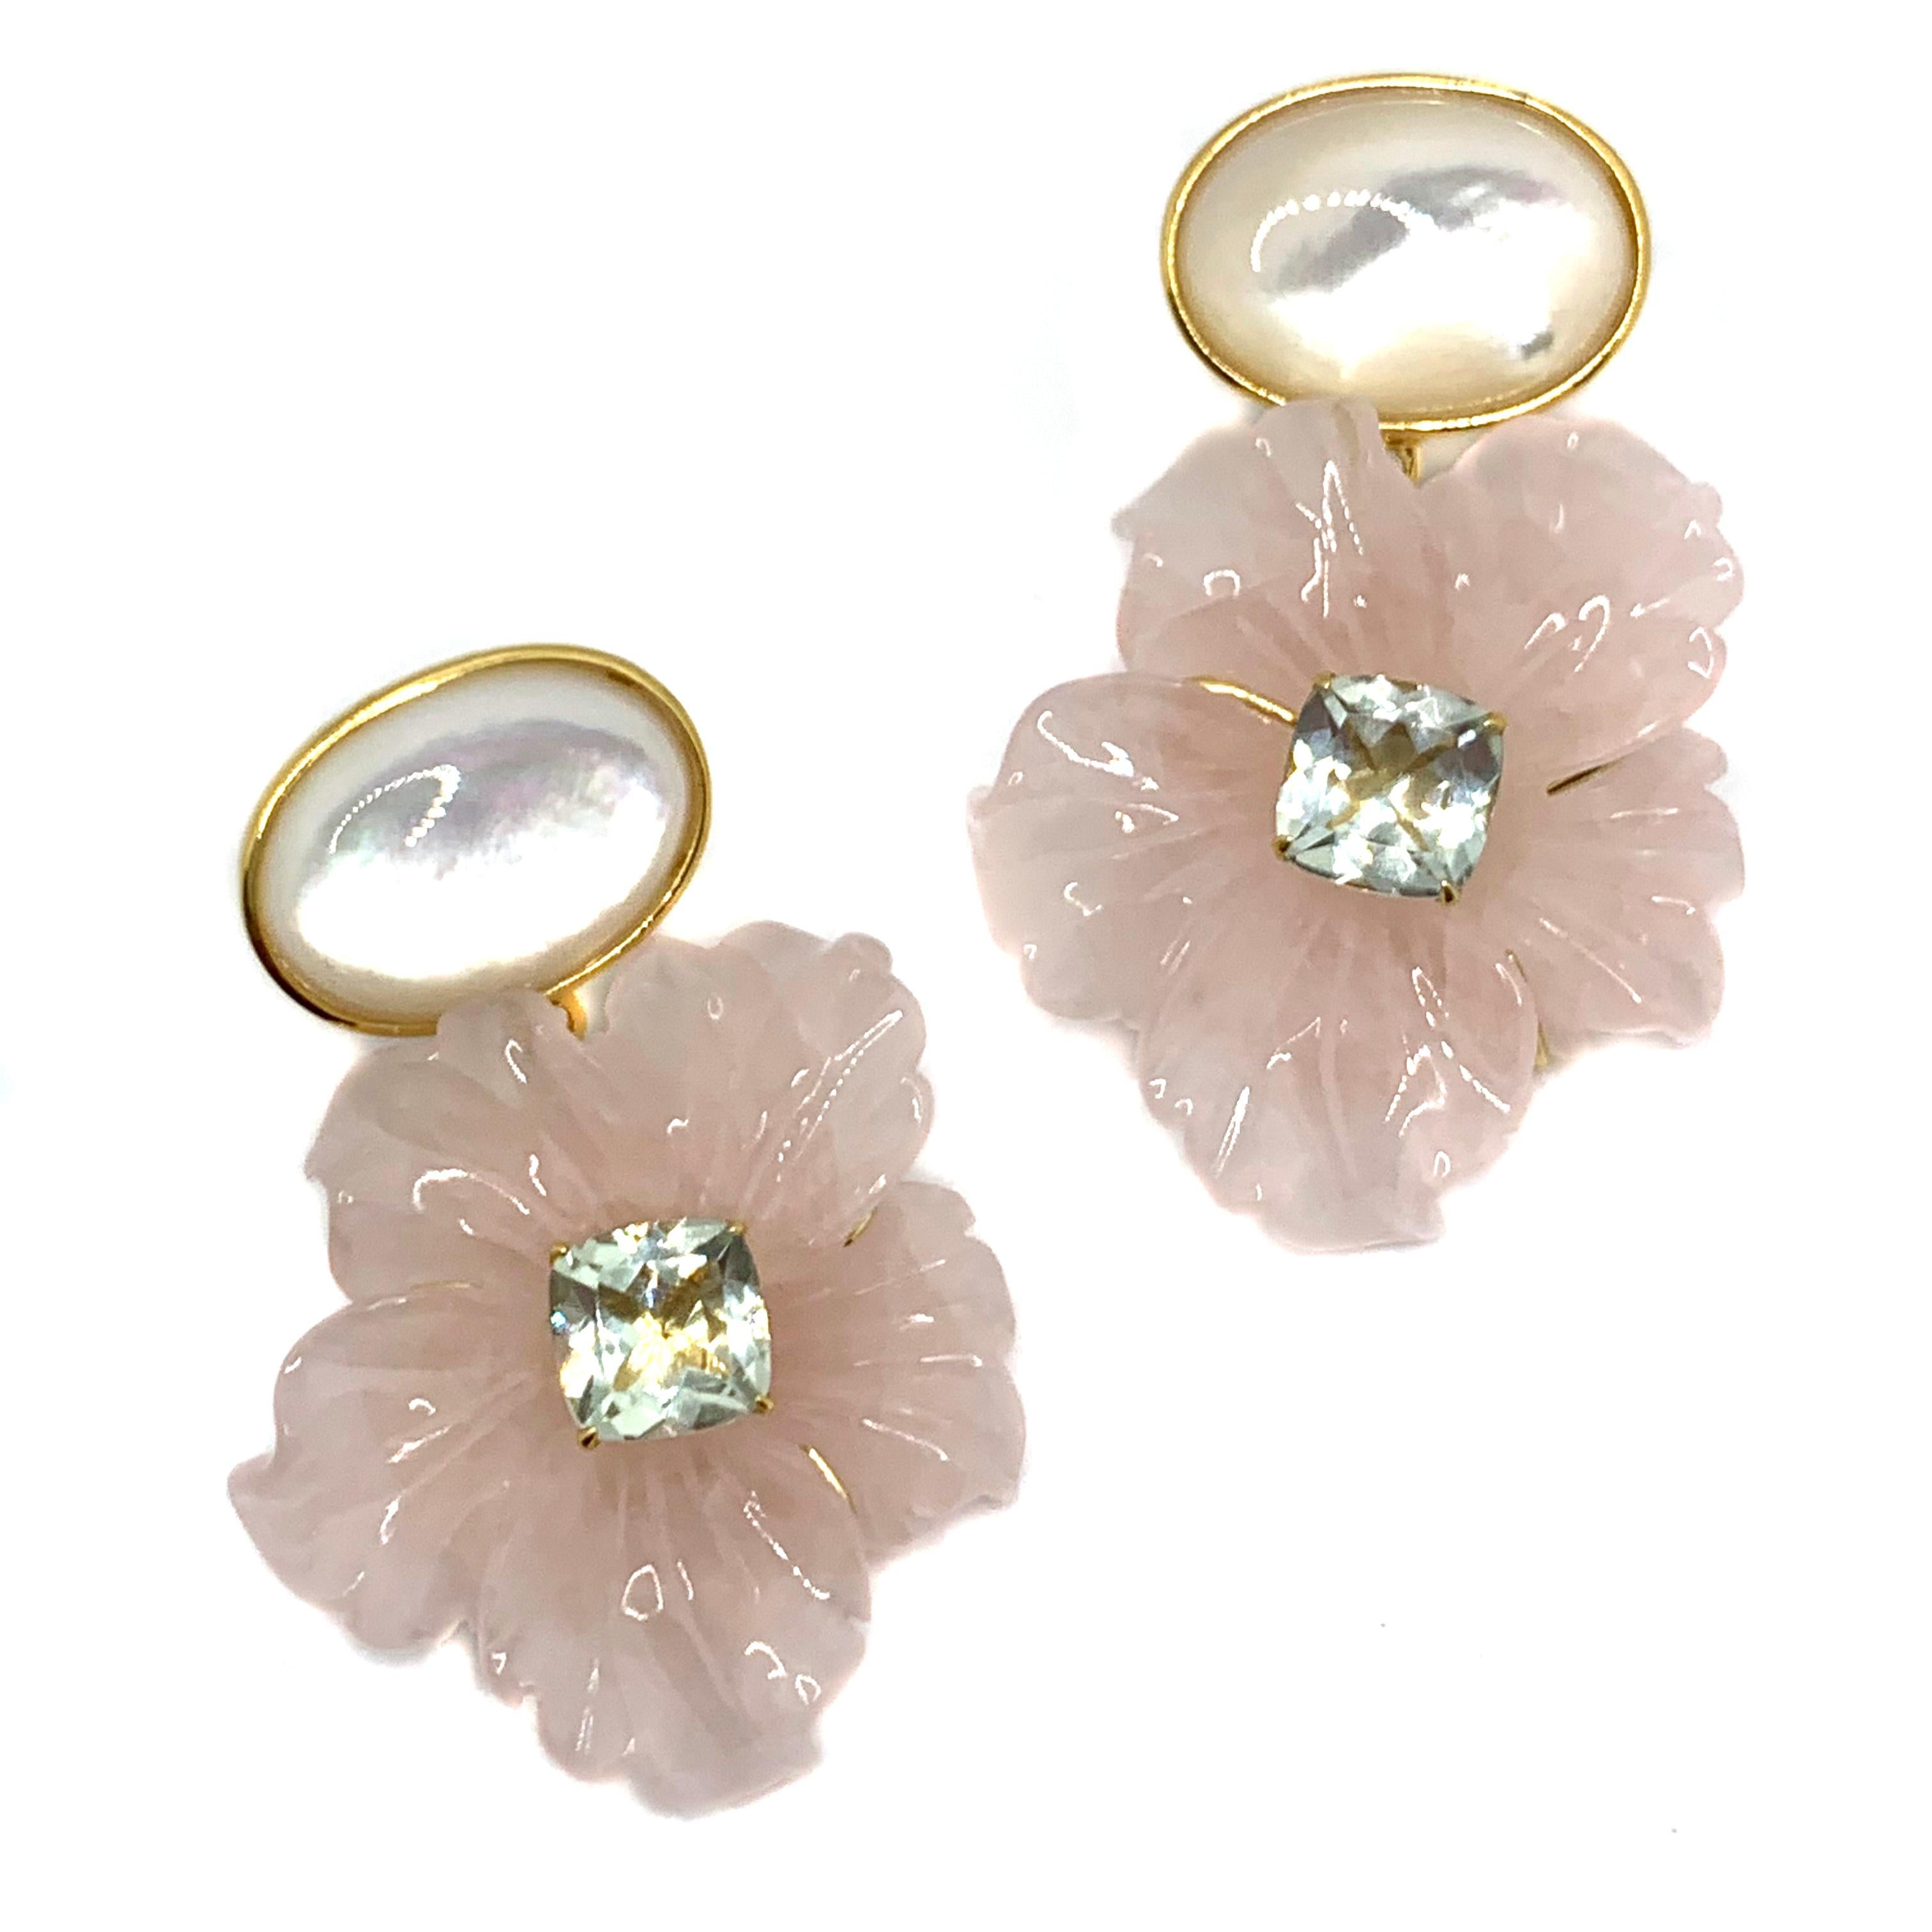 Artisan Stunning Cabochon Mother of Pearl and Carved Rose Quartz Flower Drop Earrings For Sale